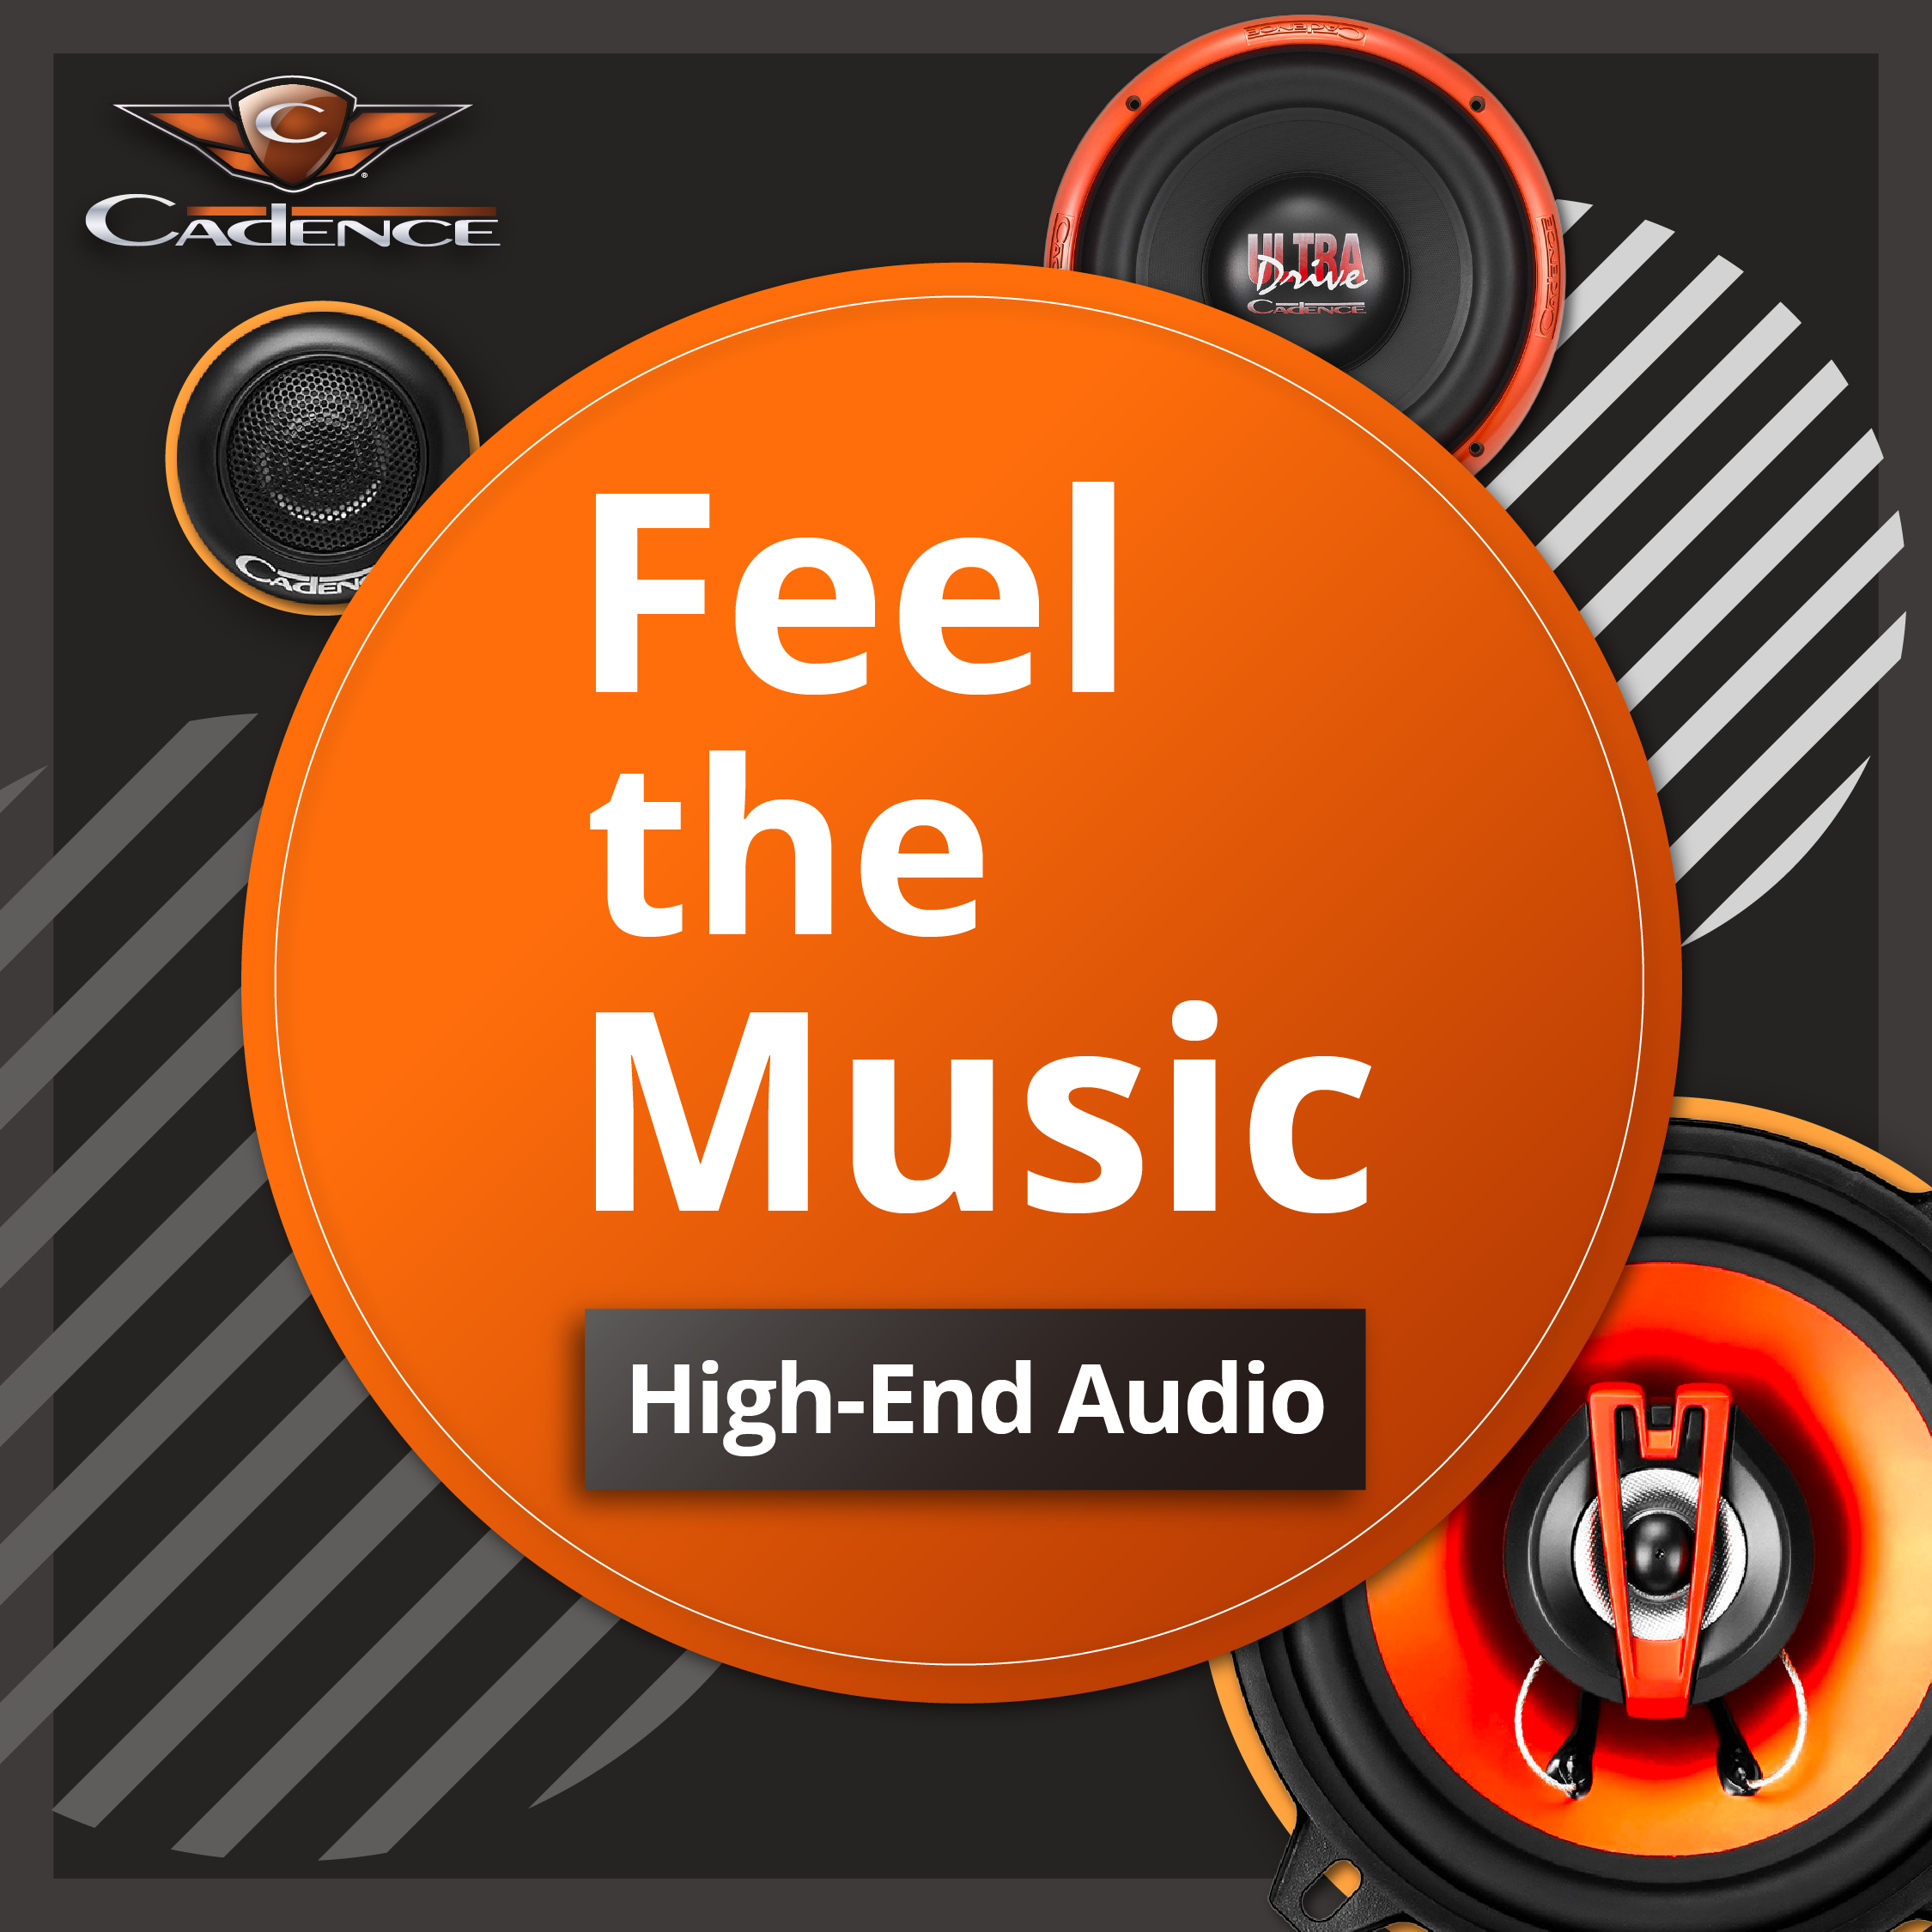 Mid-level Upgrade: Enhance your car speakers and amplifier for a premium concert hall experience